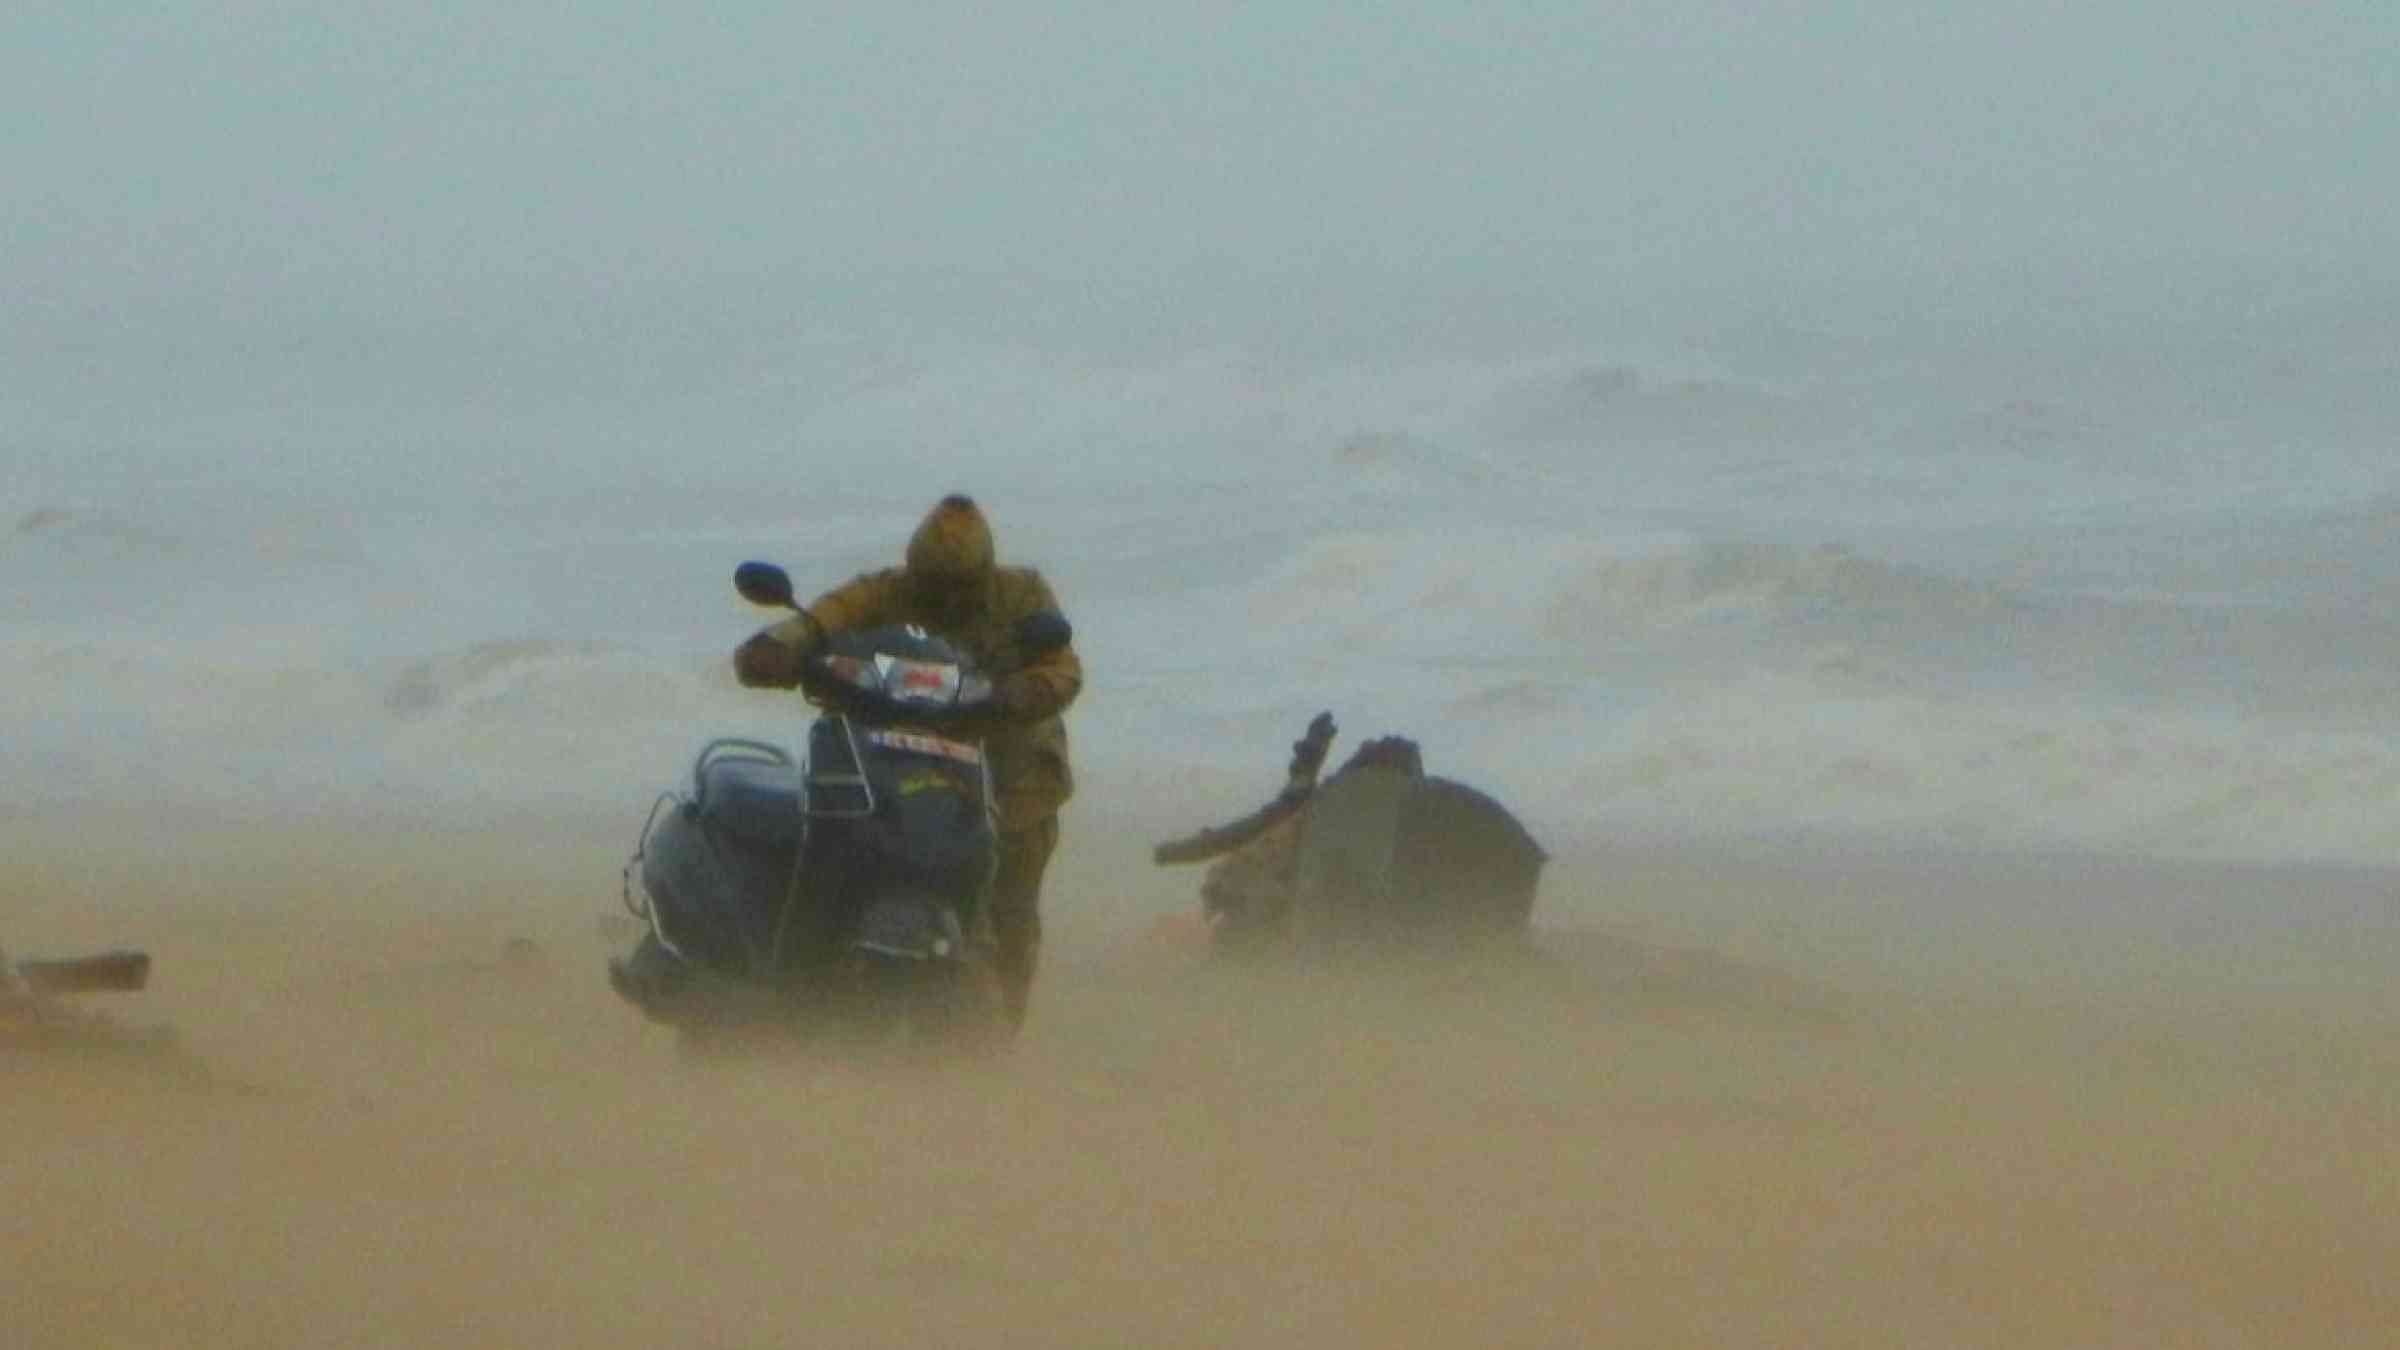 A man with his bike on the beach during Cyclone Fani, India (2019)